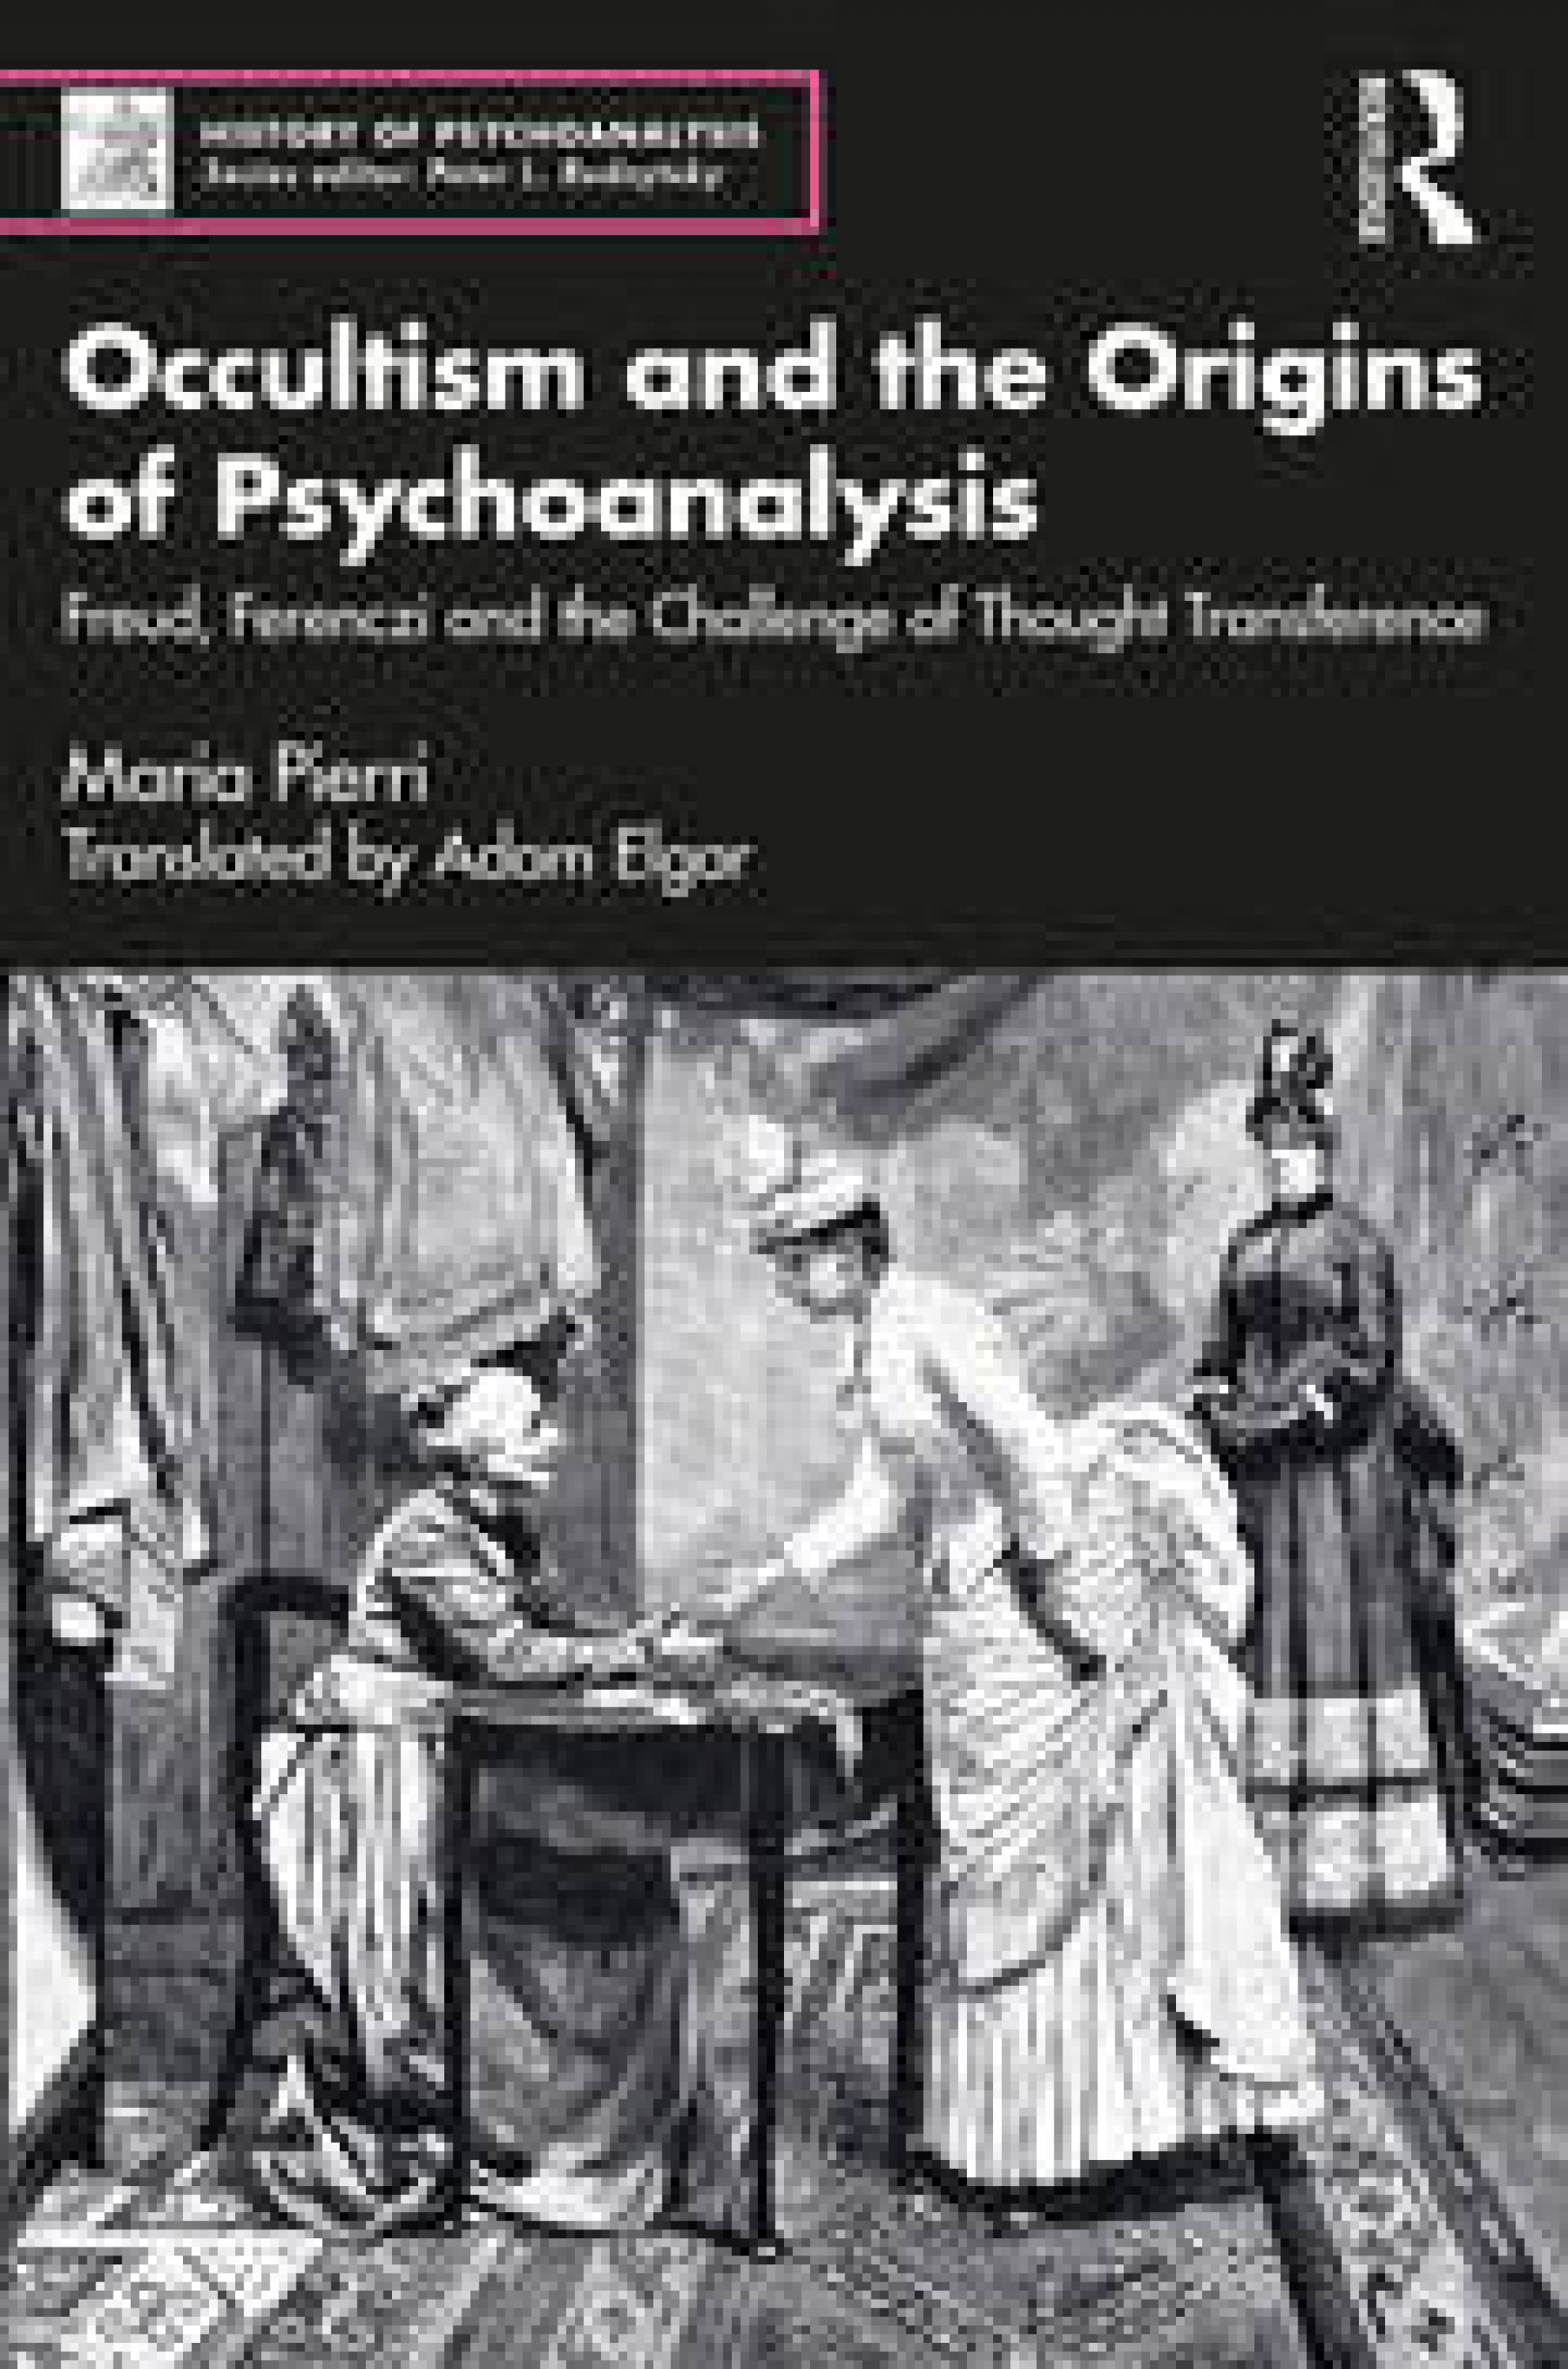 Occultism and Origins of Psychoanalysis. Freud, Ferenczi and the Challenge of Thought Transference.